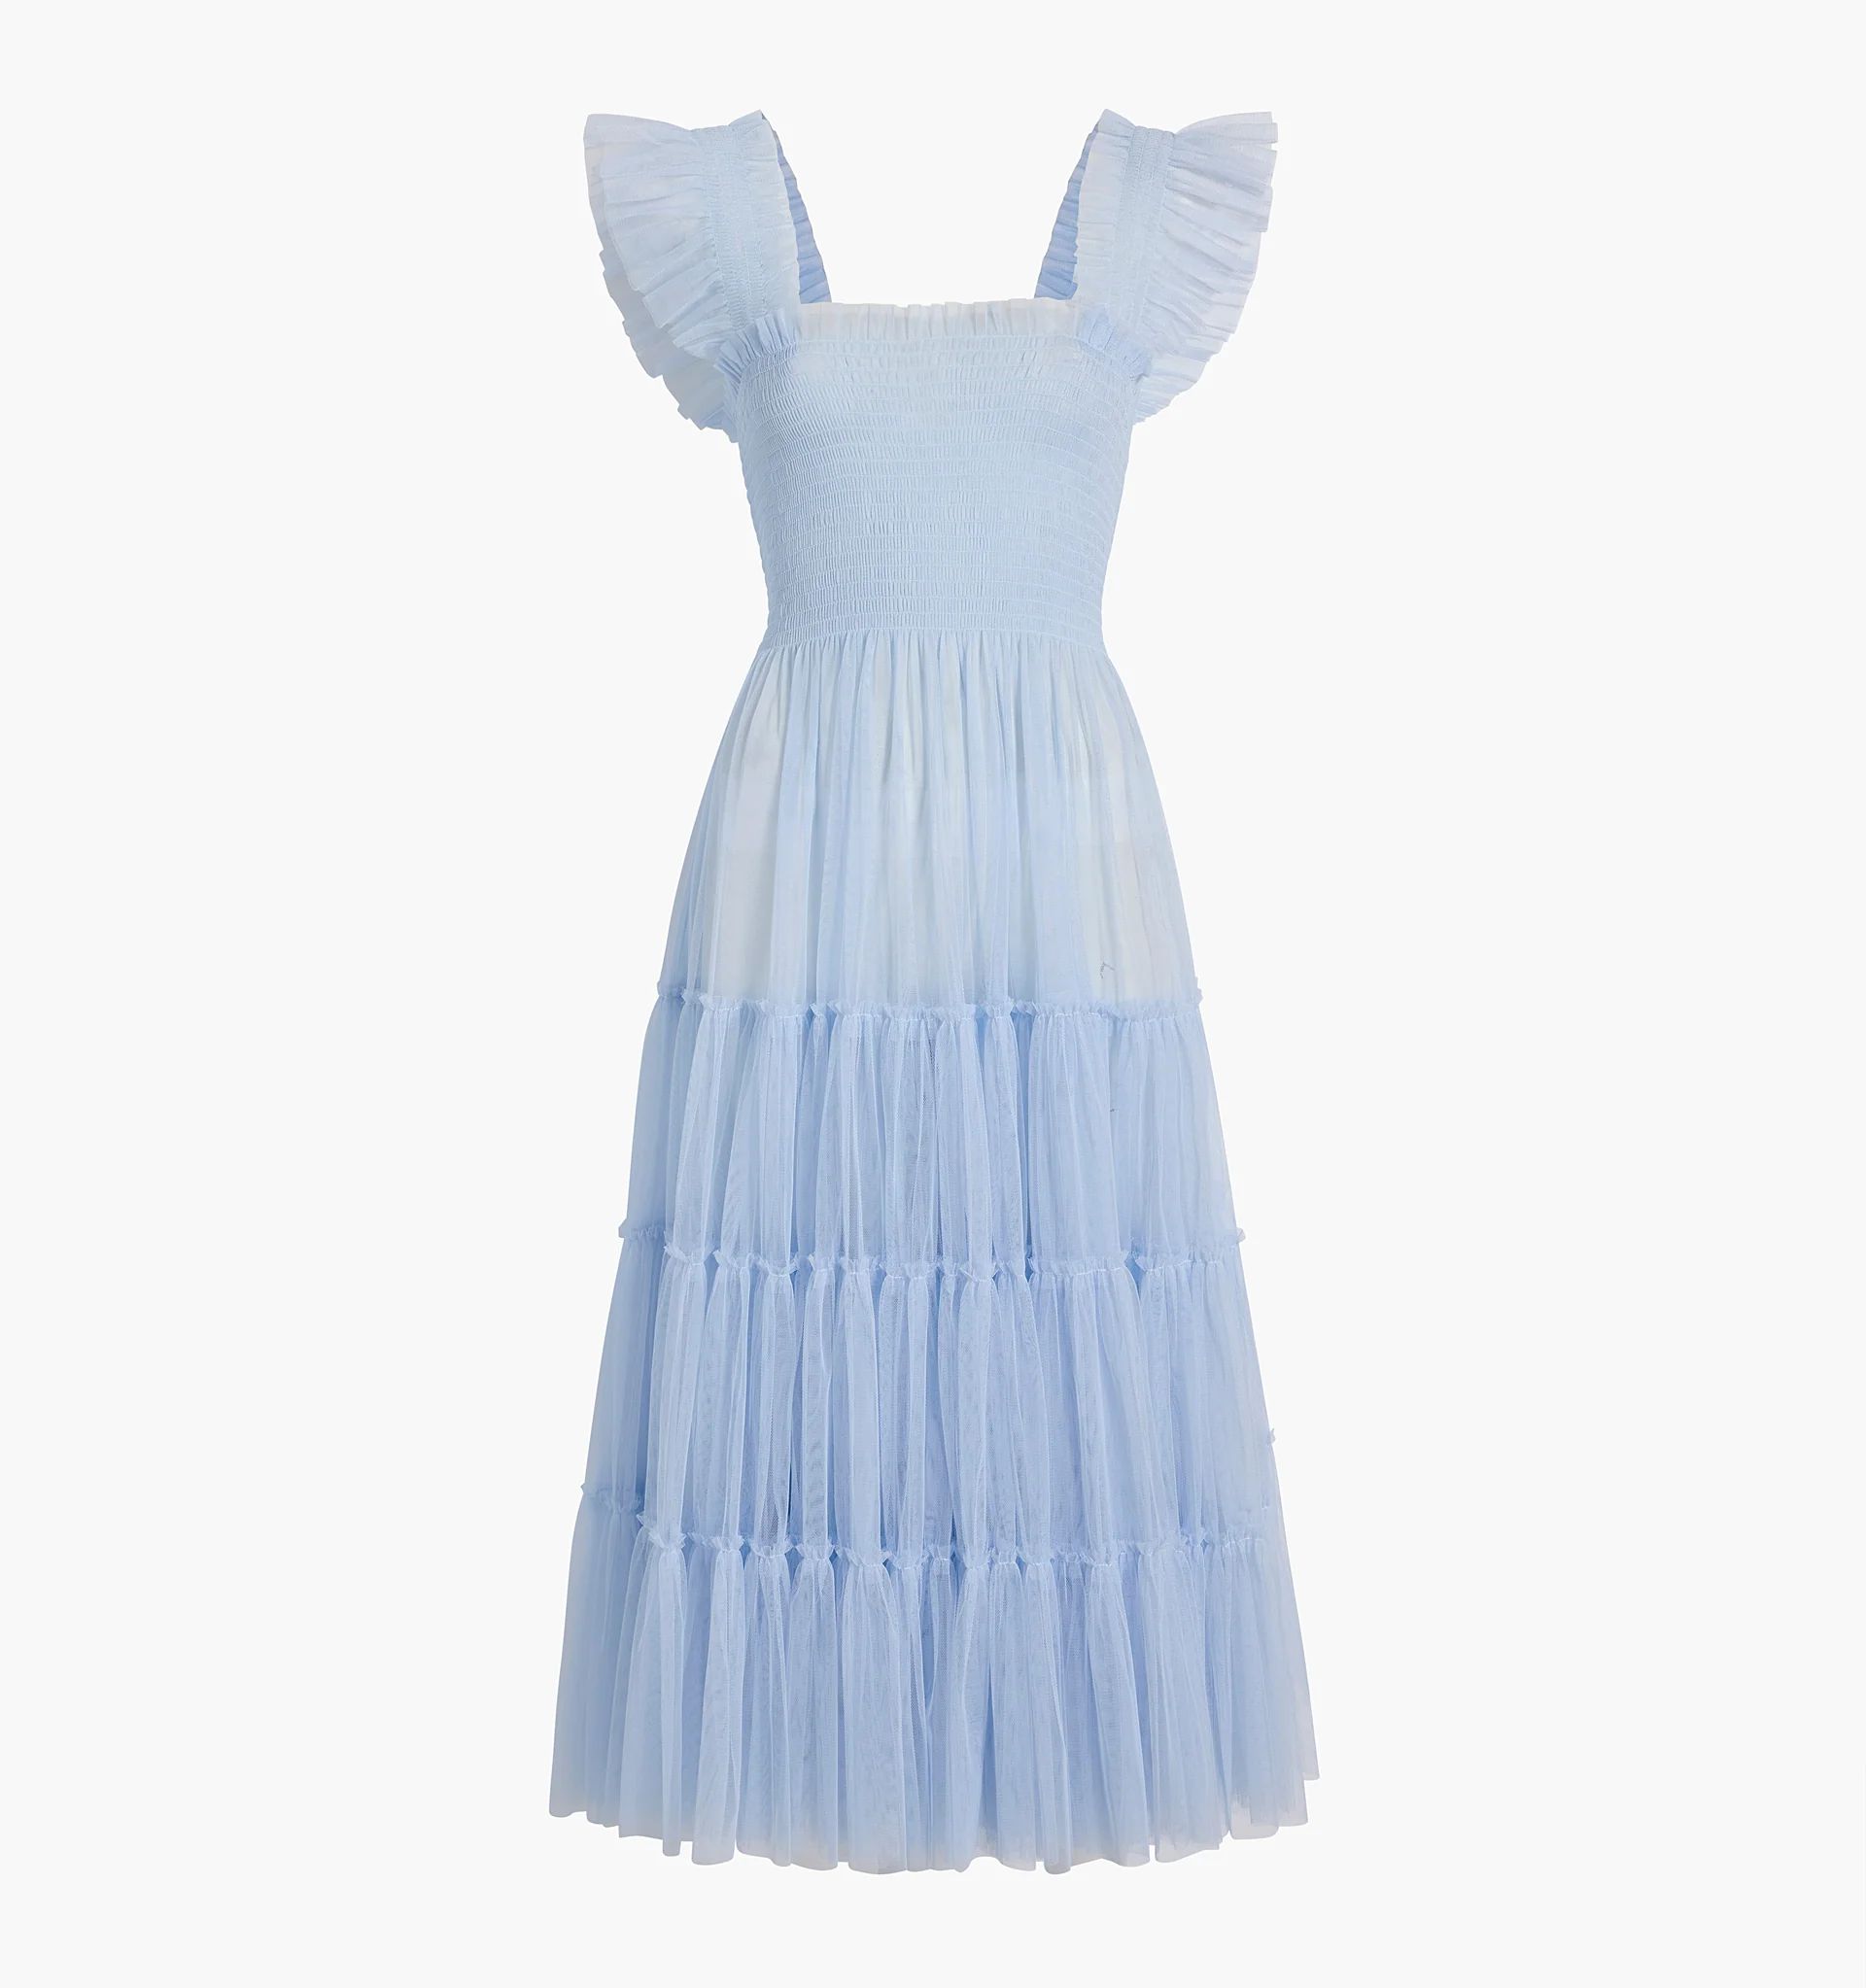 The Collector's Edition Ellie Nap Dress - Lilac Sky Tulle | Hill House Home